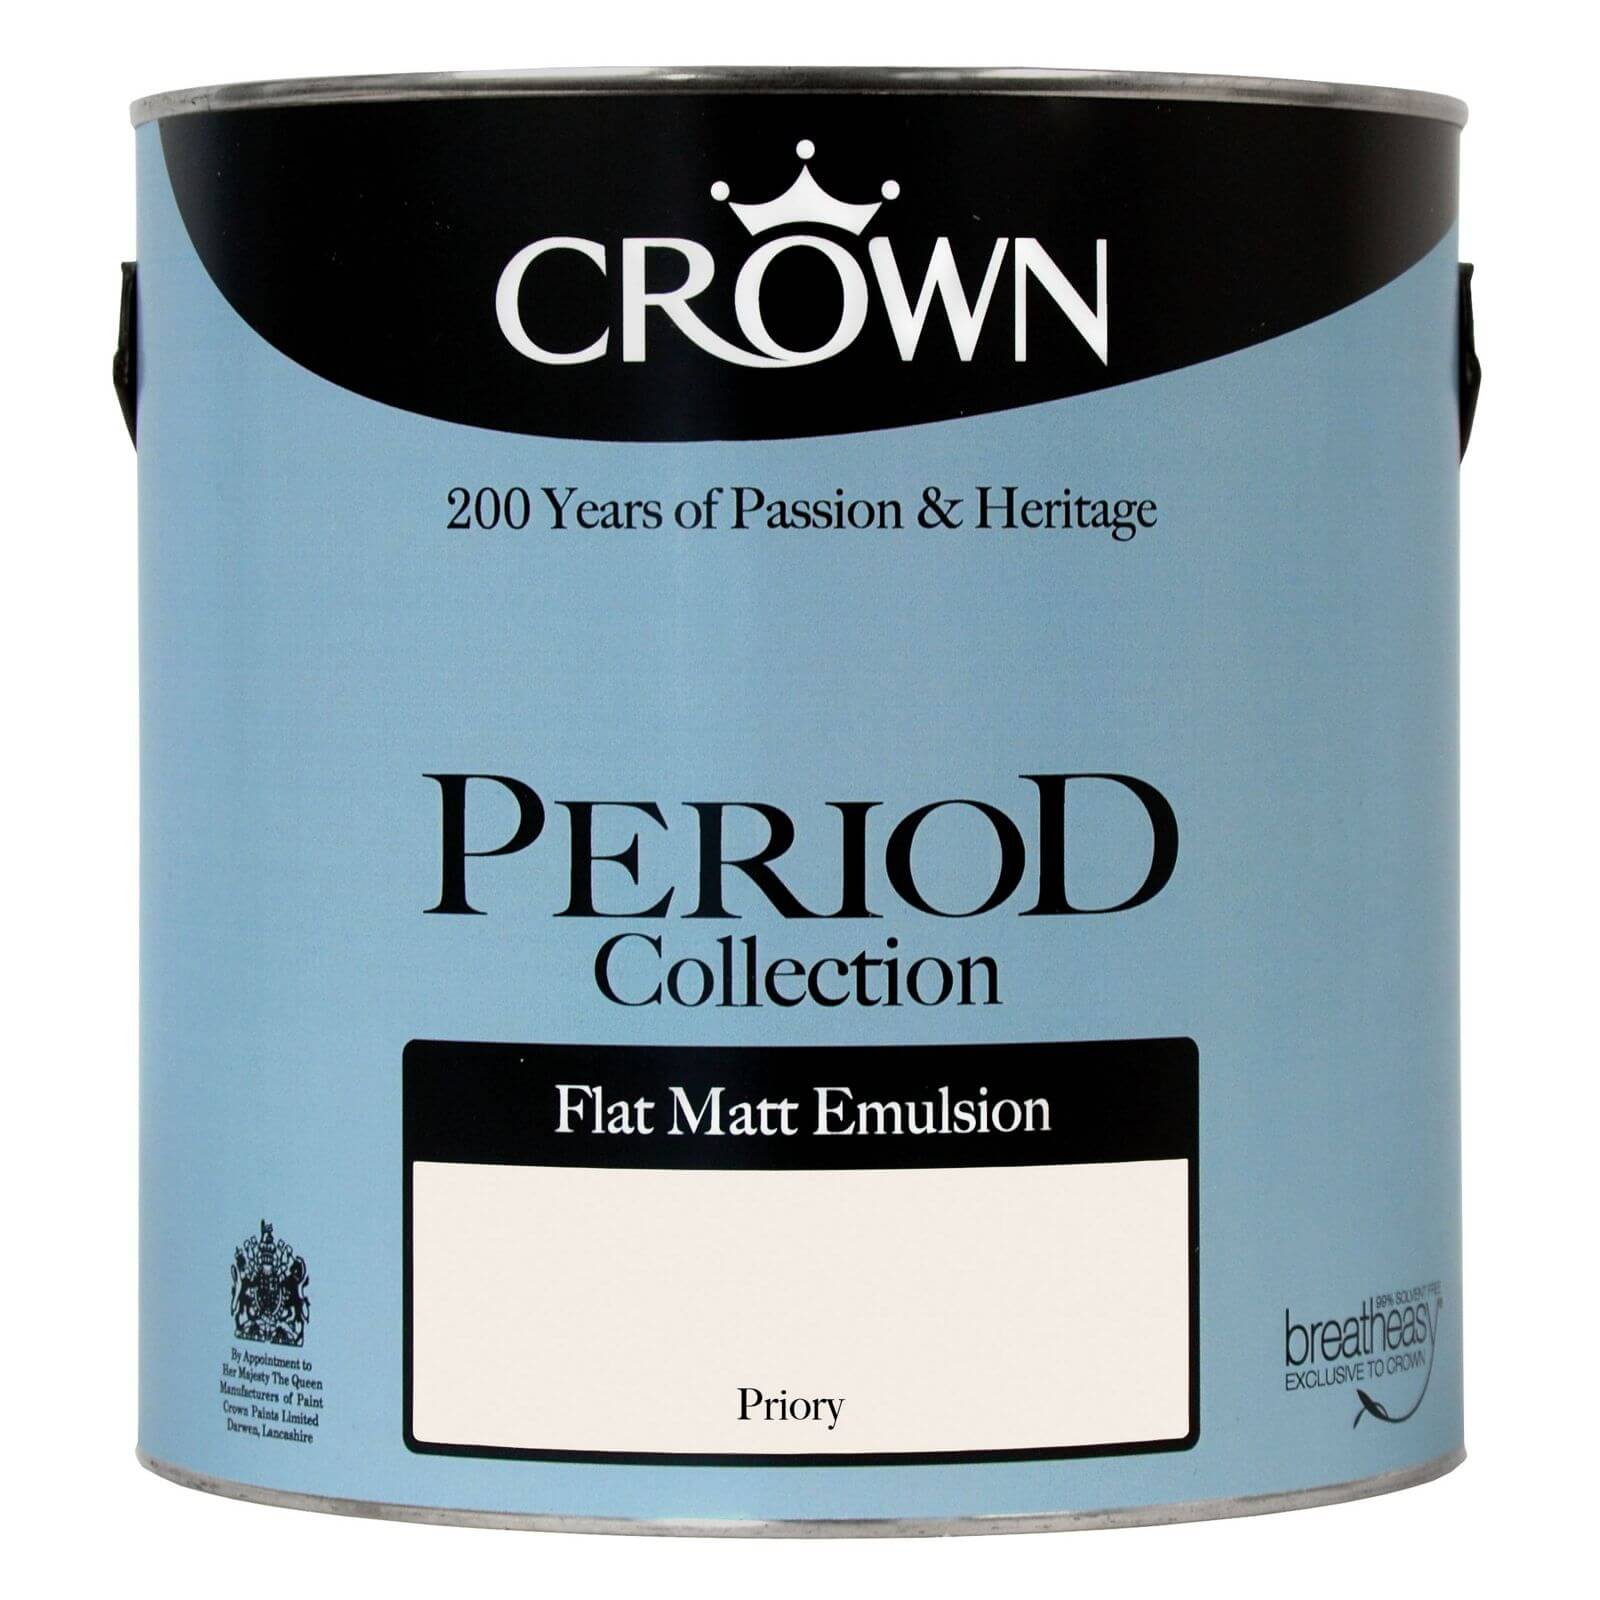 Crown Period Collection Priory - Flat Matt Emulsion Paint - 2.5L